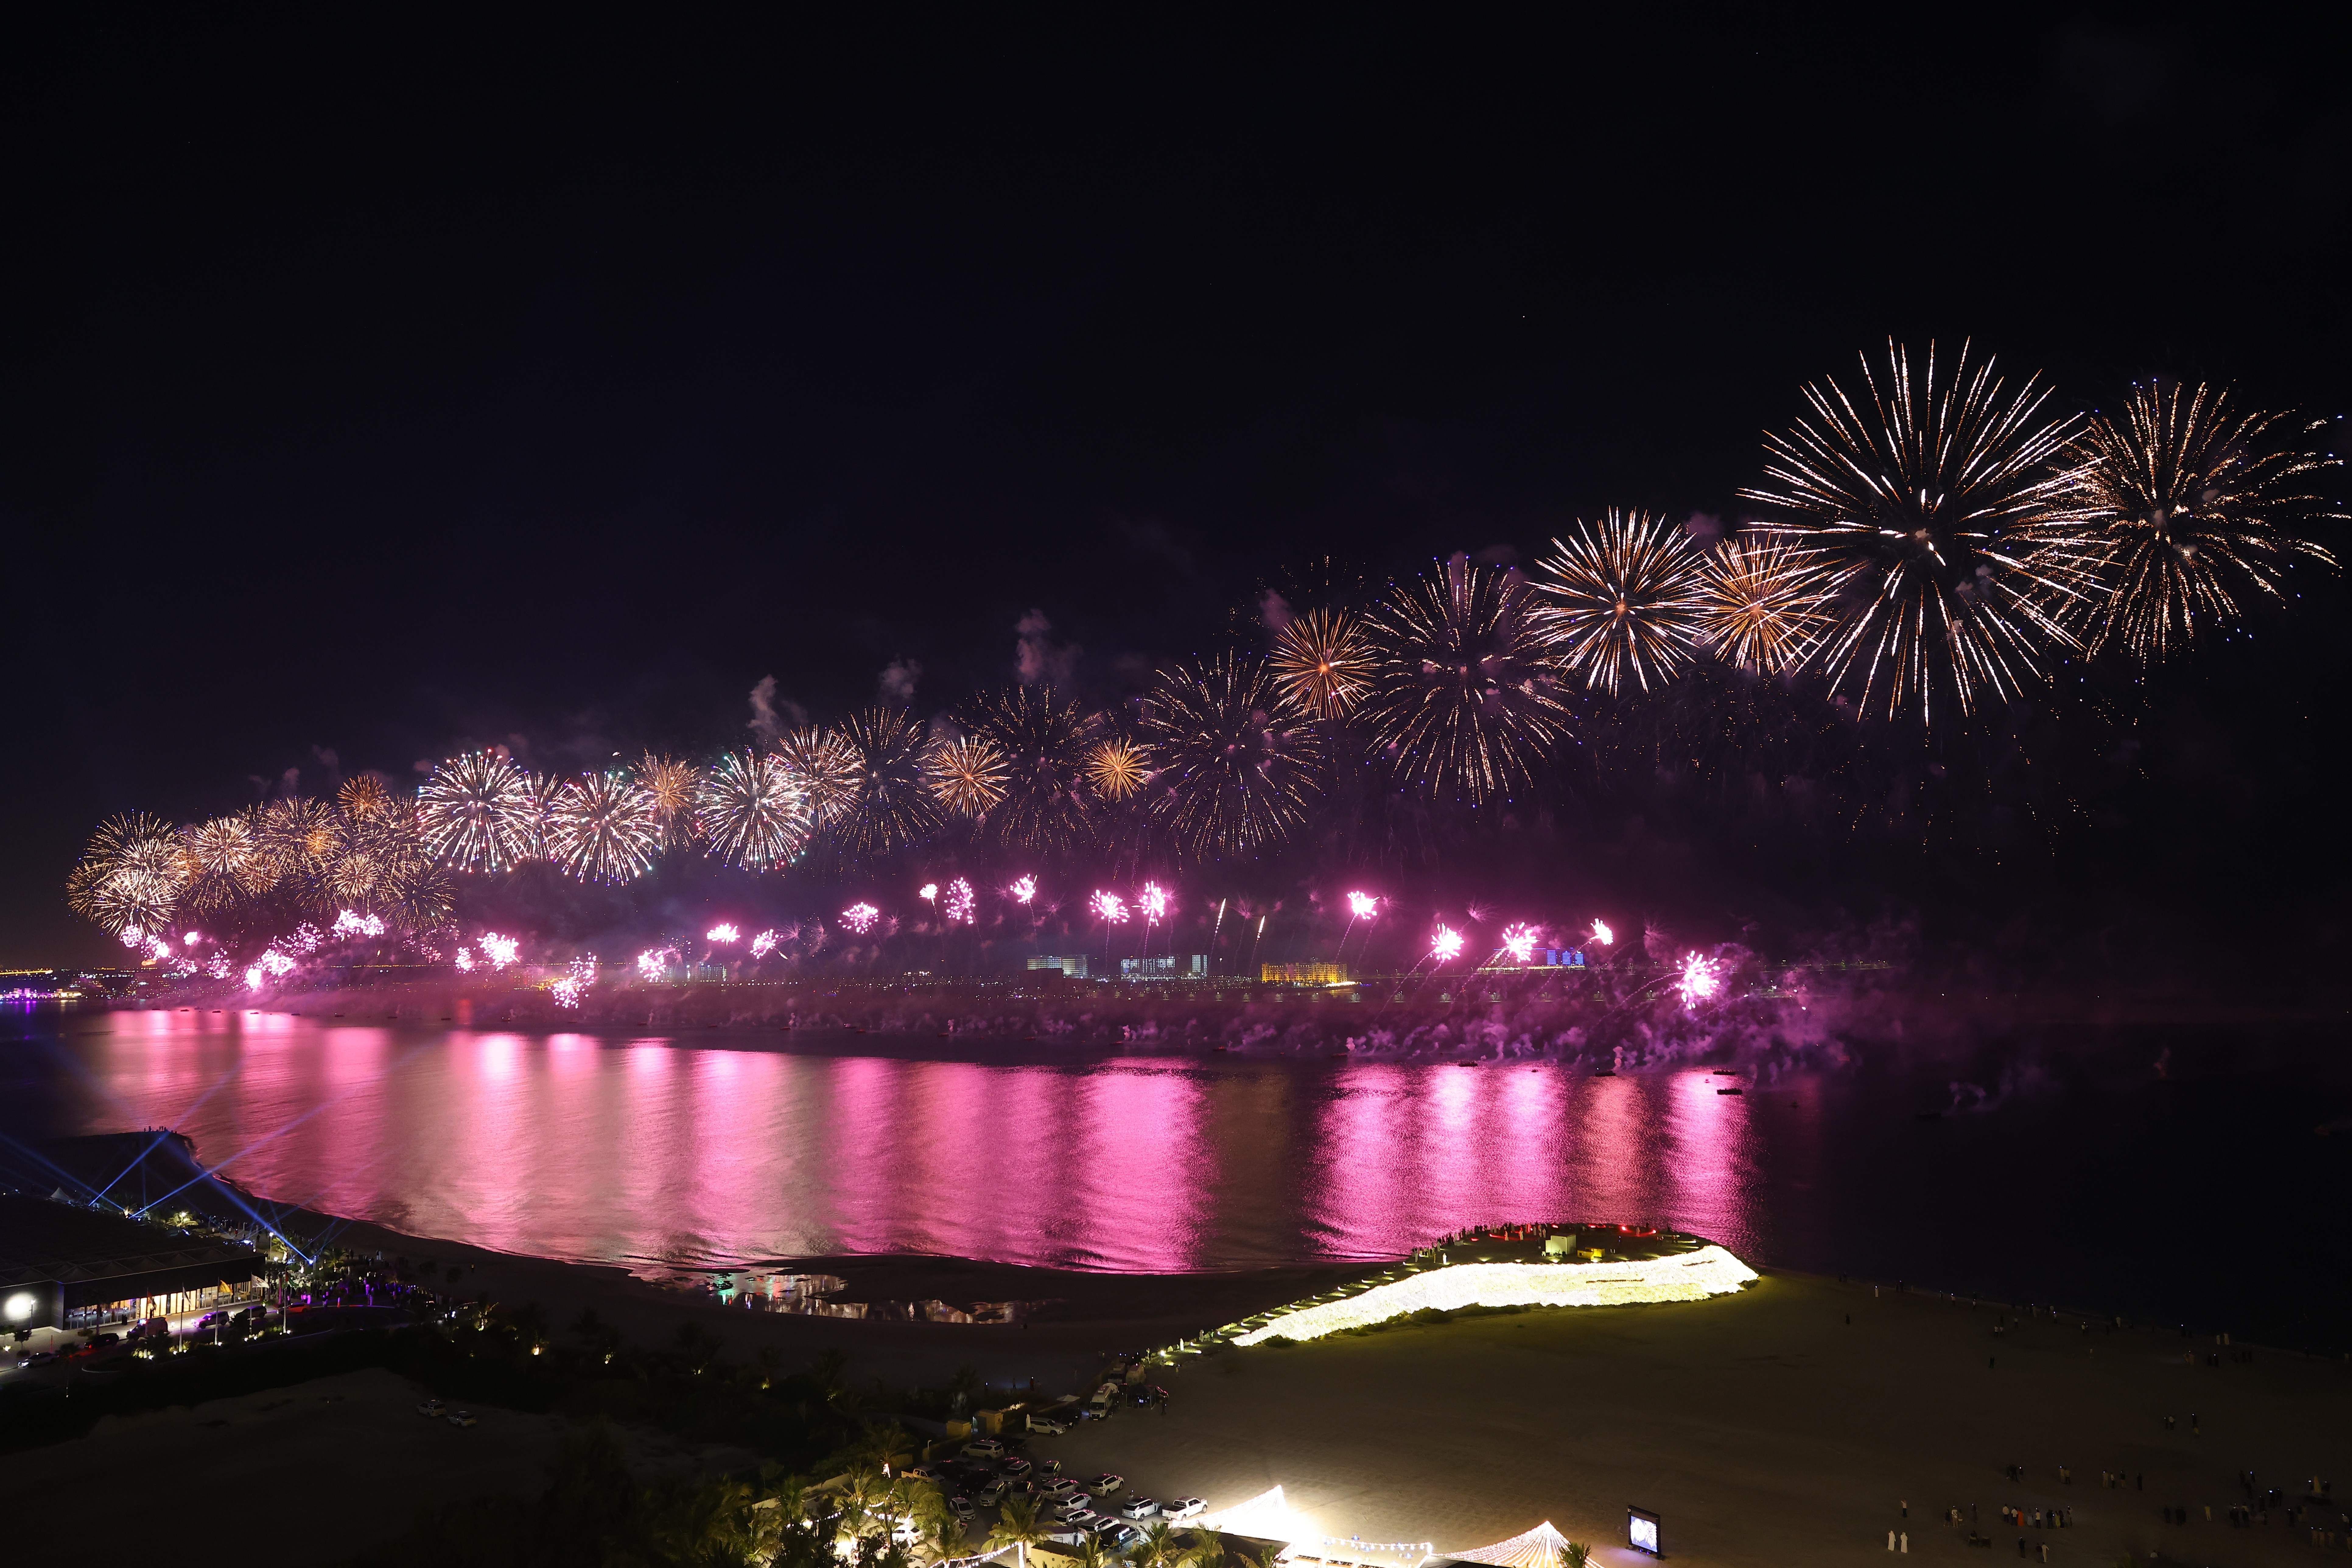 New Year's Eve fireworks erupt over Ras al-Khaimah, one of the world's largest fireworks shows on January 1, 2021. 